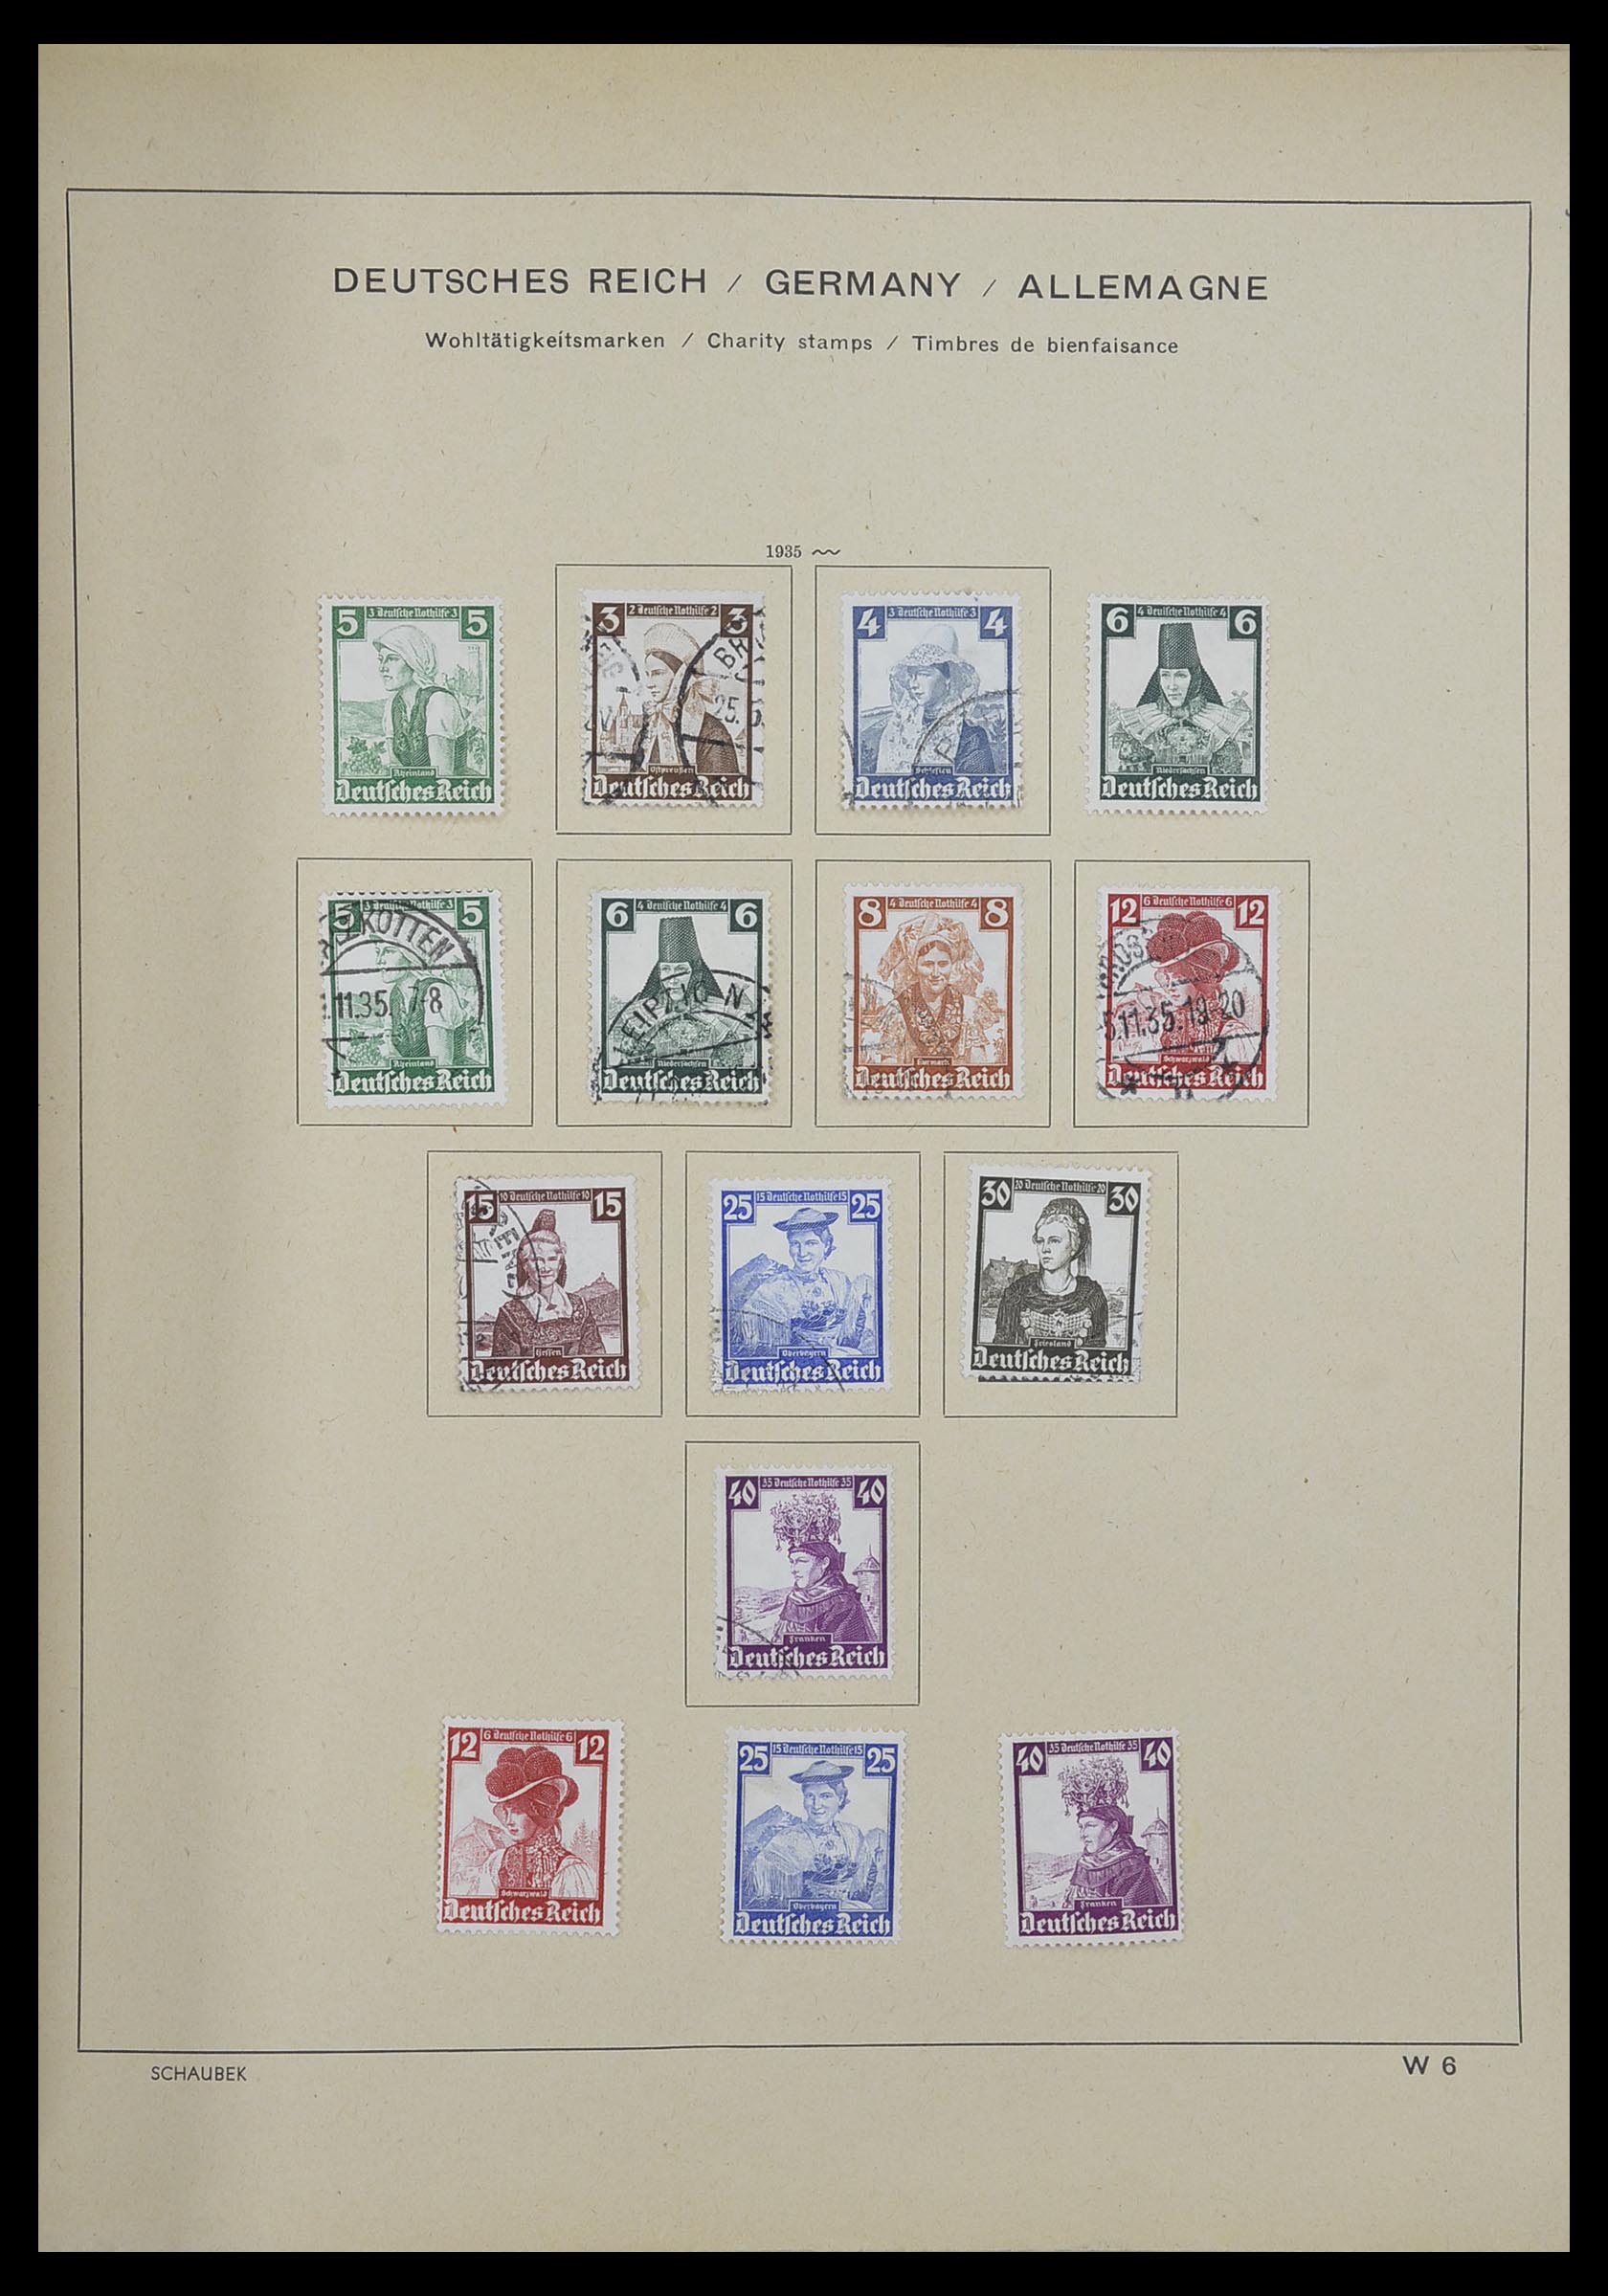 33192 050 - Stamp collection 33192 Germany 1850-1984.